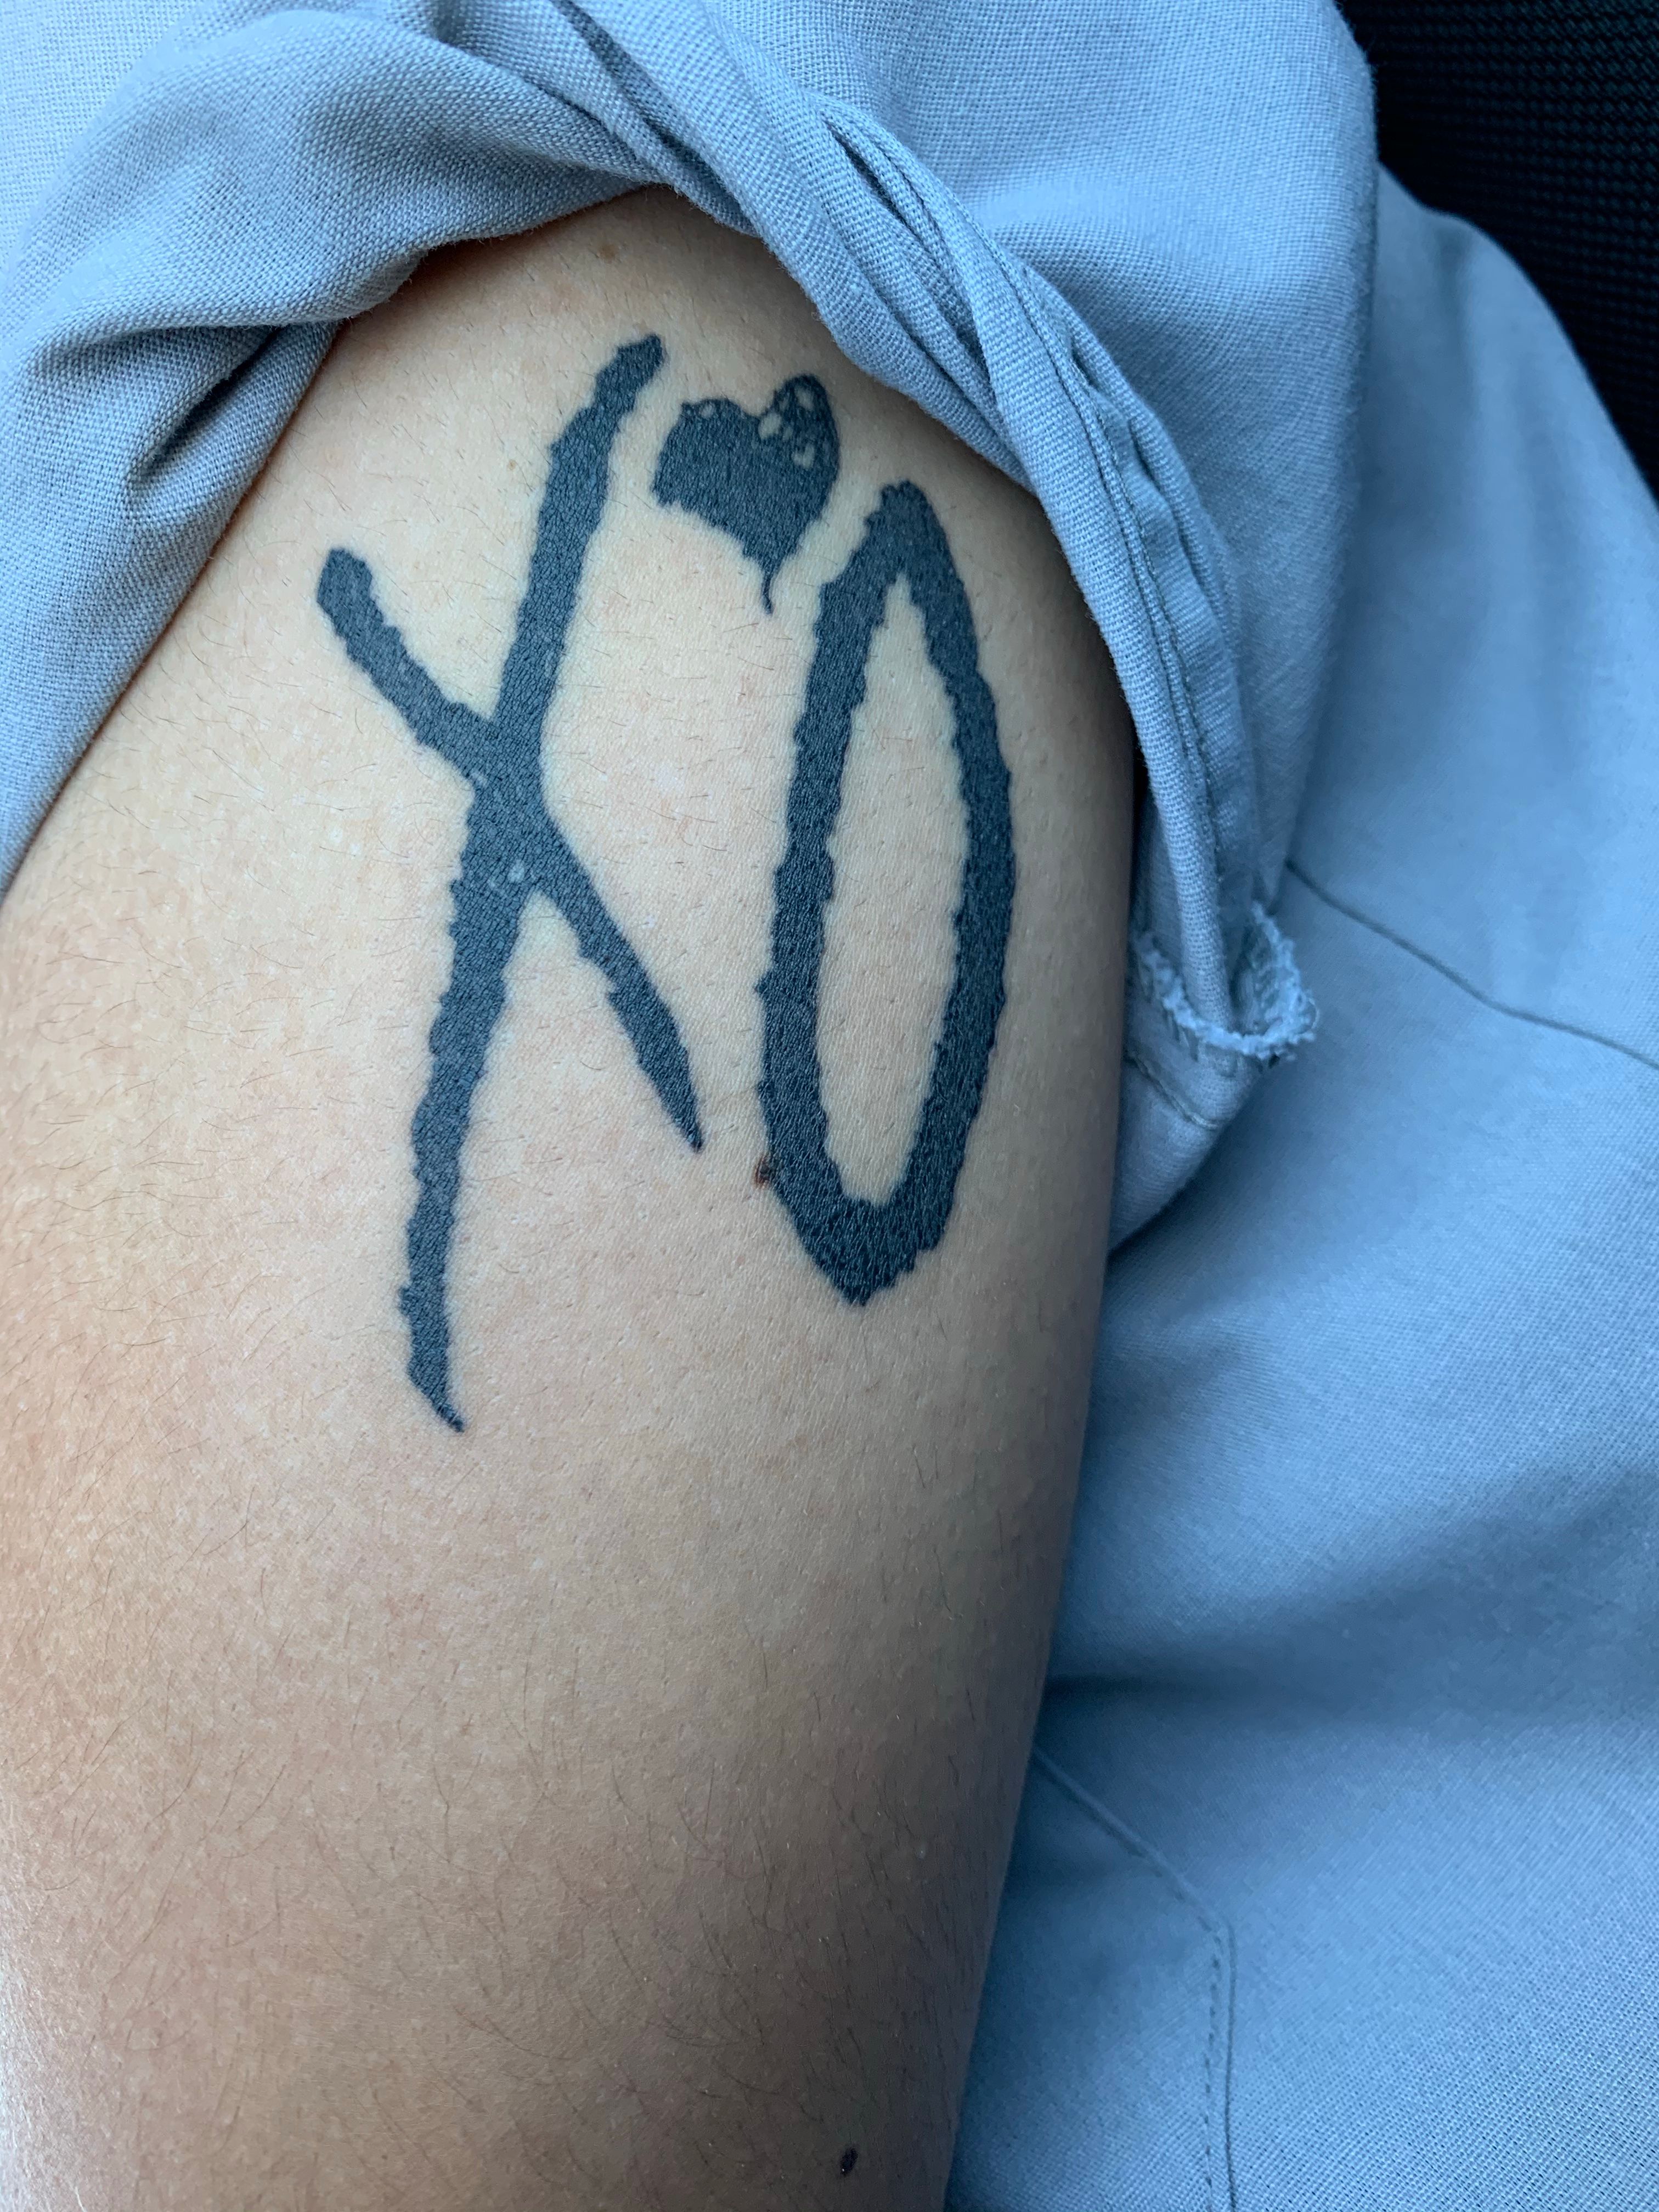 New tattoo I got yesterday inspired by Abels After Hours  Memento  Mori Credit for the design  TheWeekndGraphics on IG  rTheWeeknd